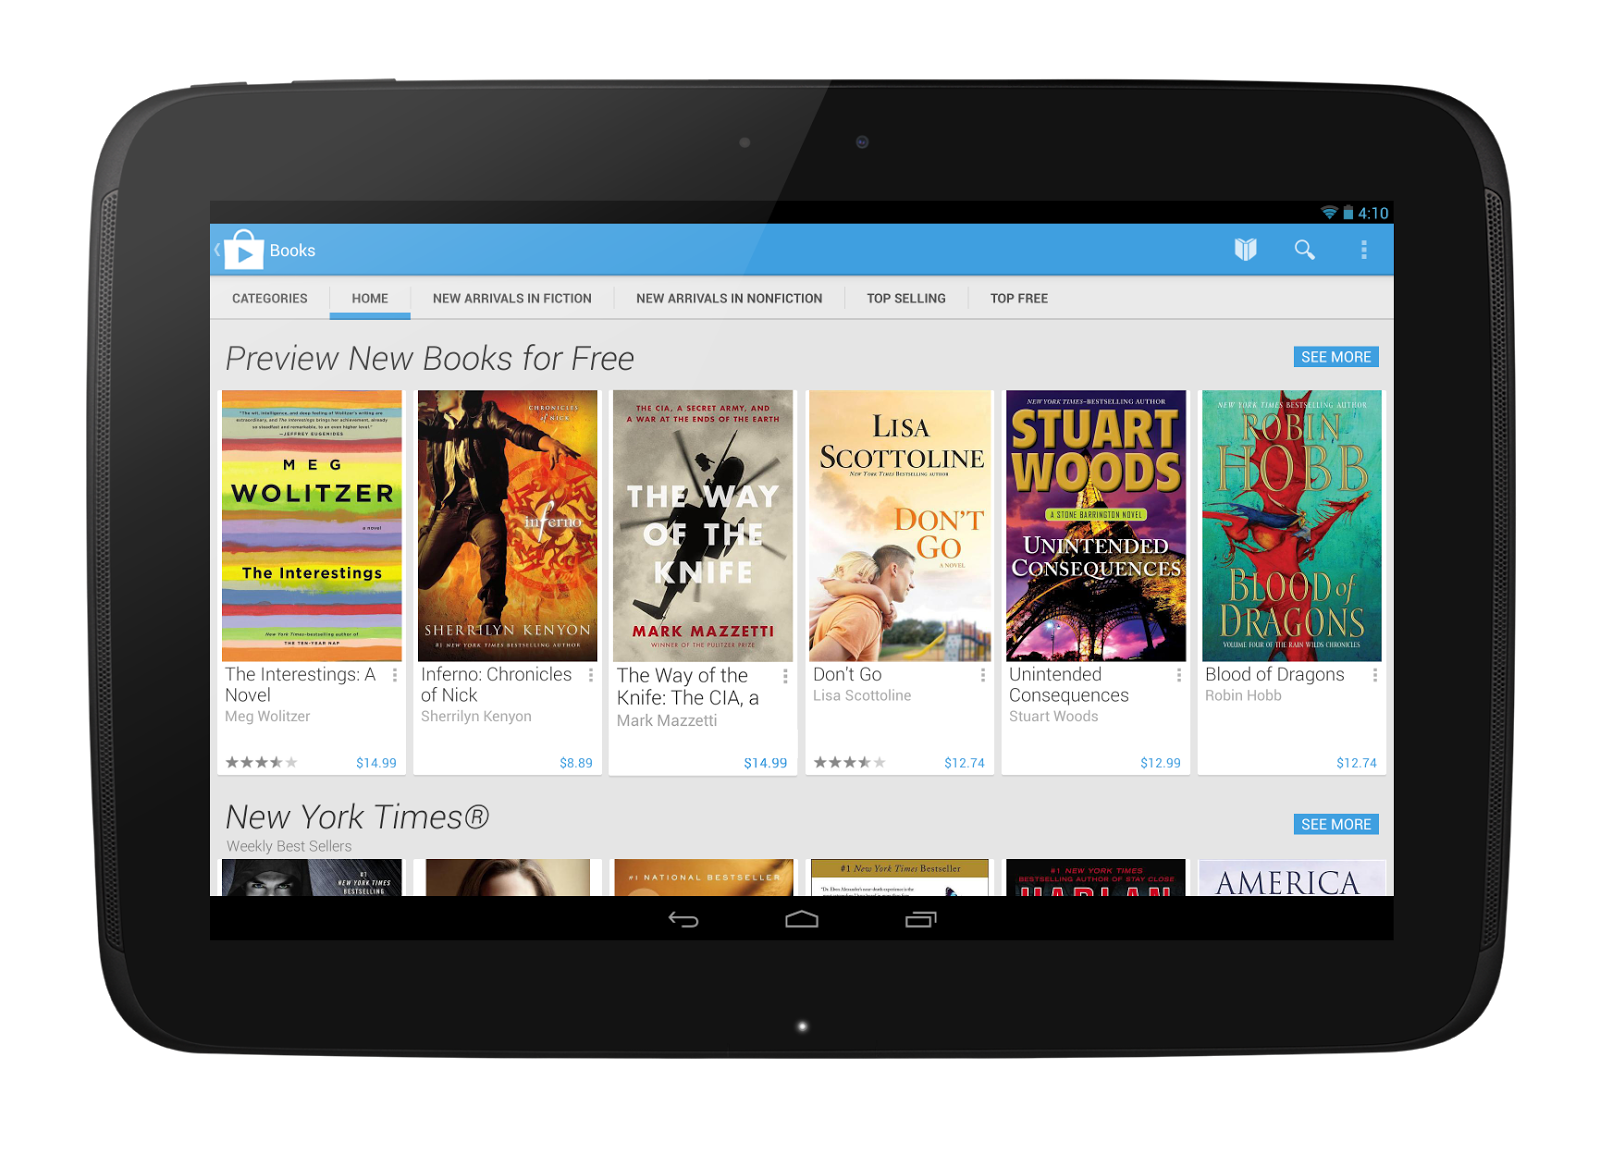 Download Google Play Store App 4.0.27 APK With More Fixes And Improvements